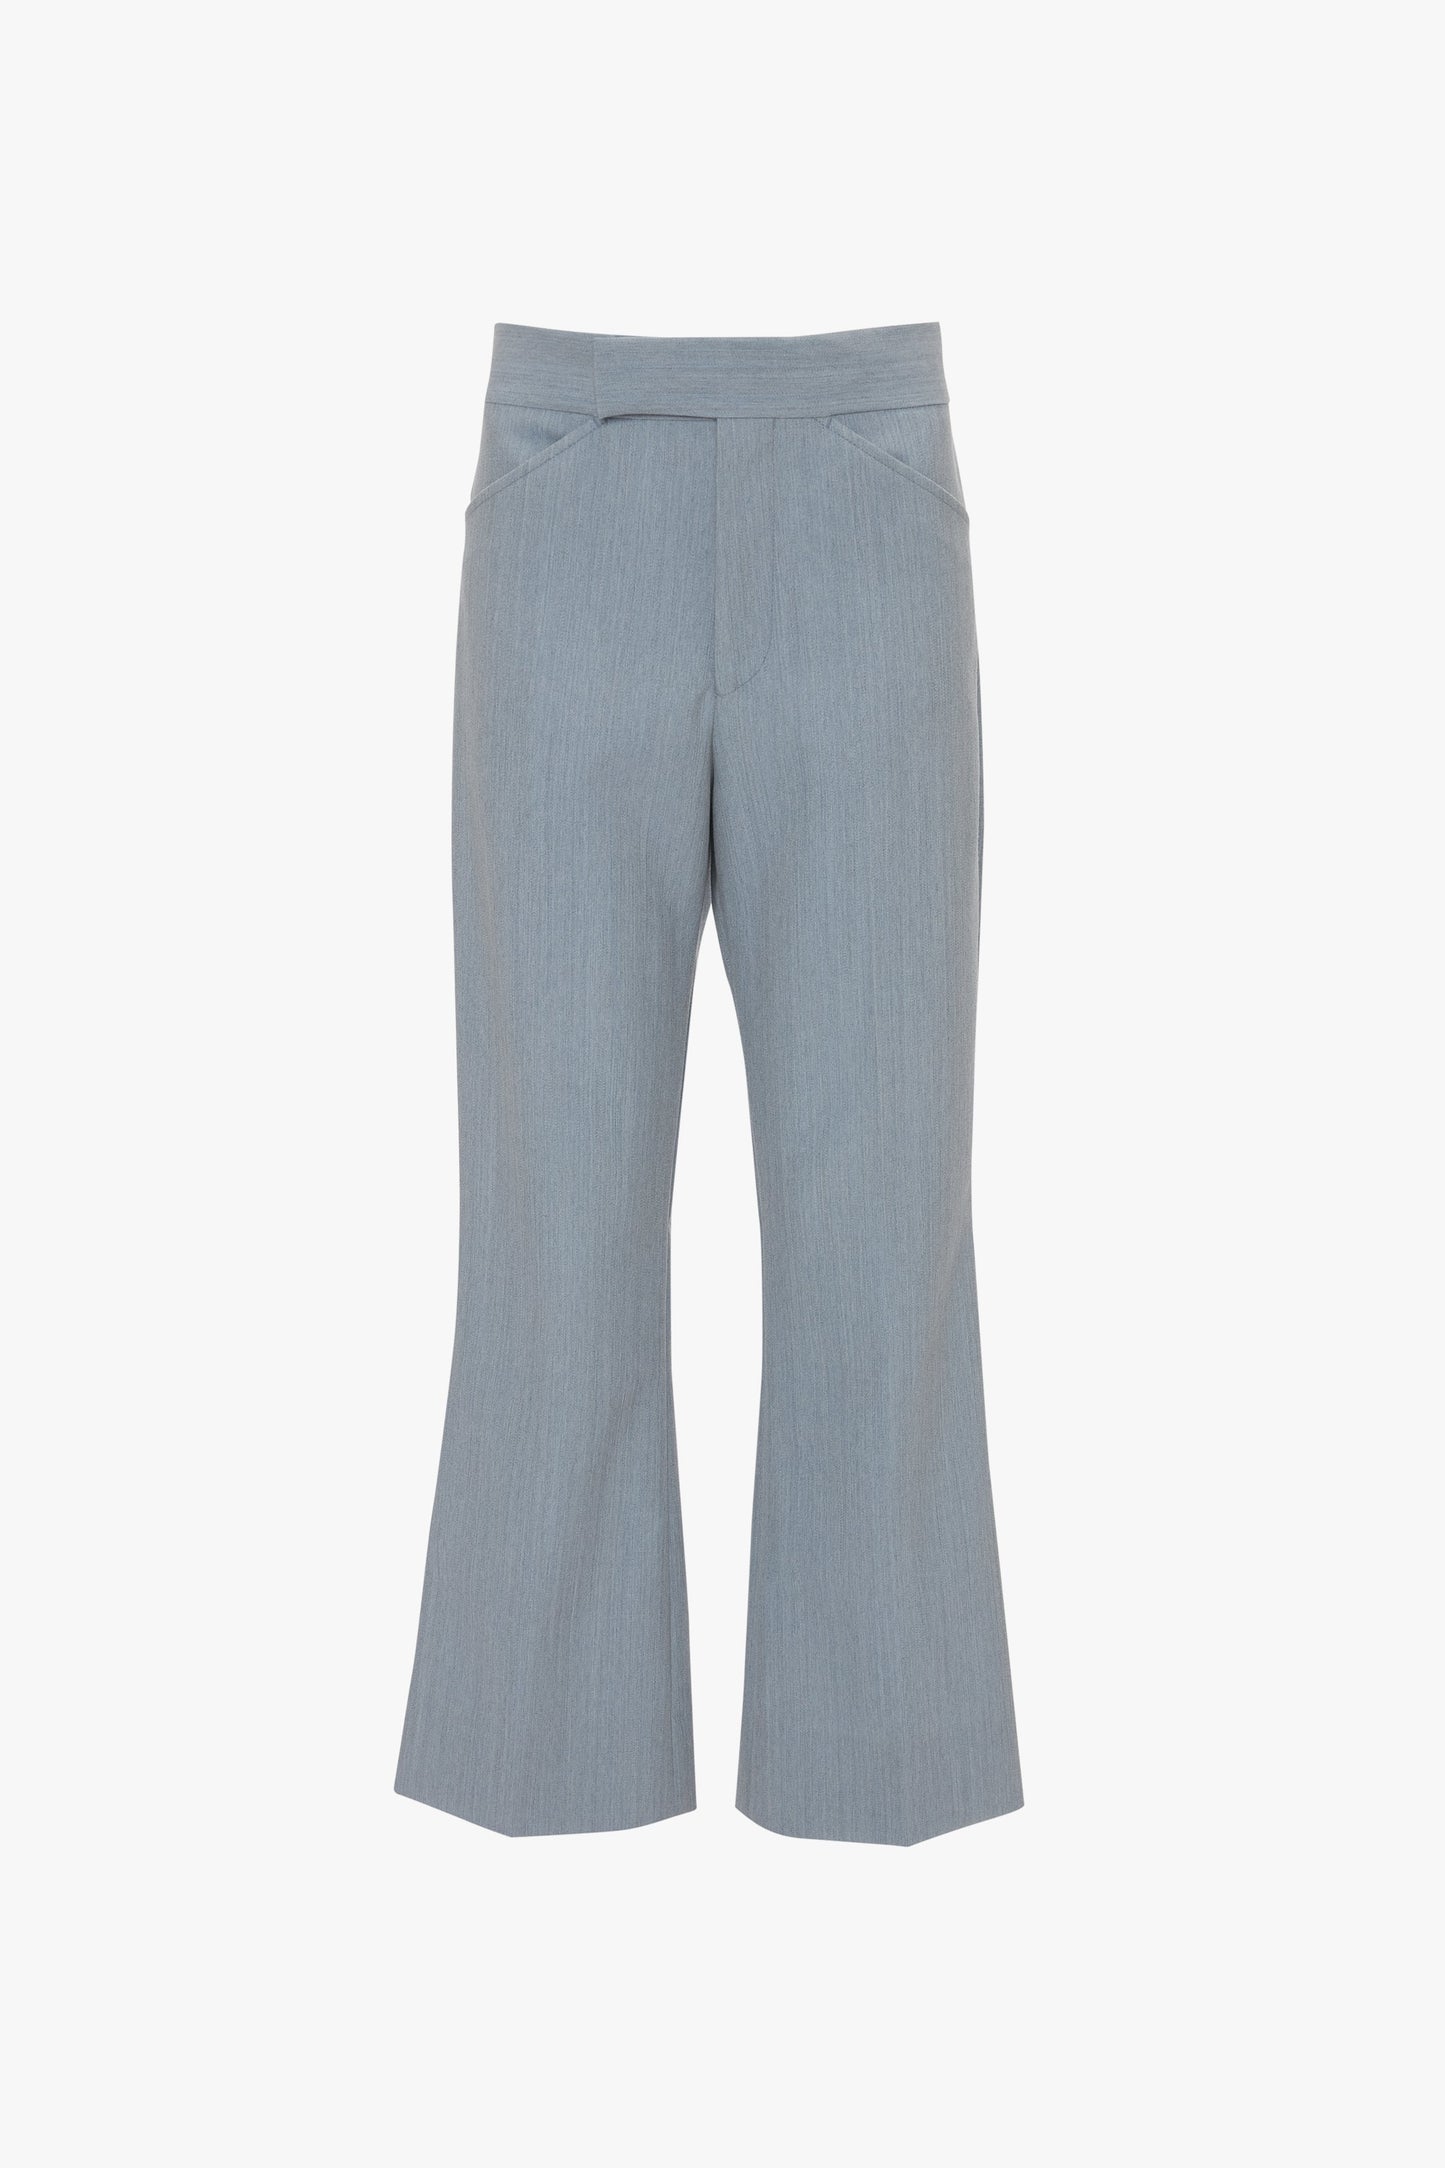 A pair of light gray Exclusive Wide Cropped Flare Trouser In Marina by Victoria Beckham, displayed against a plain white background.